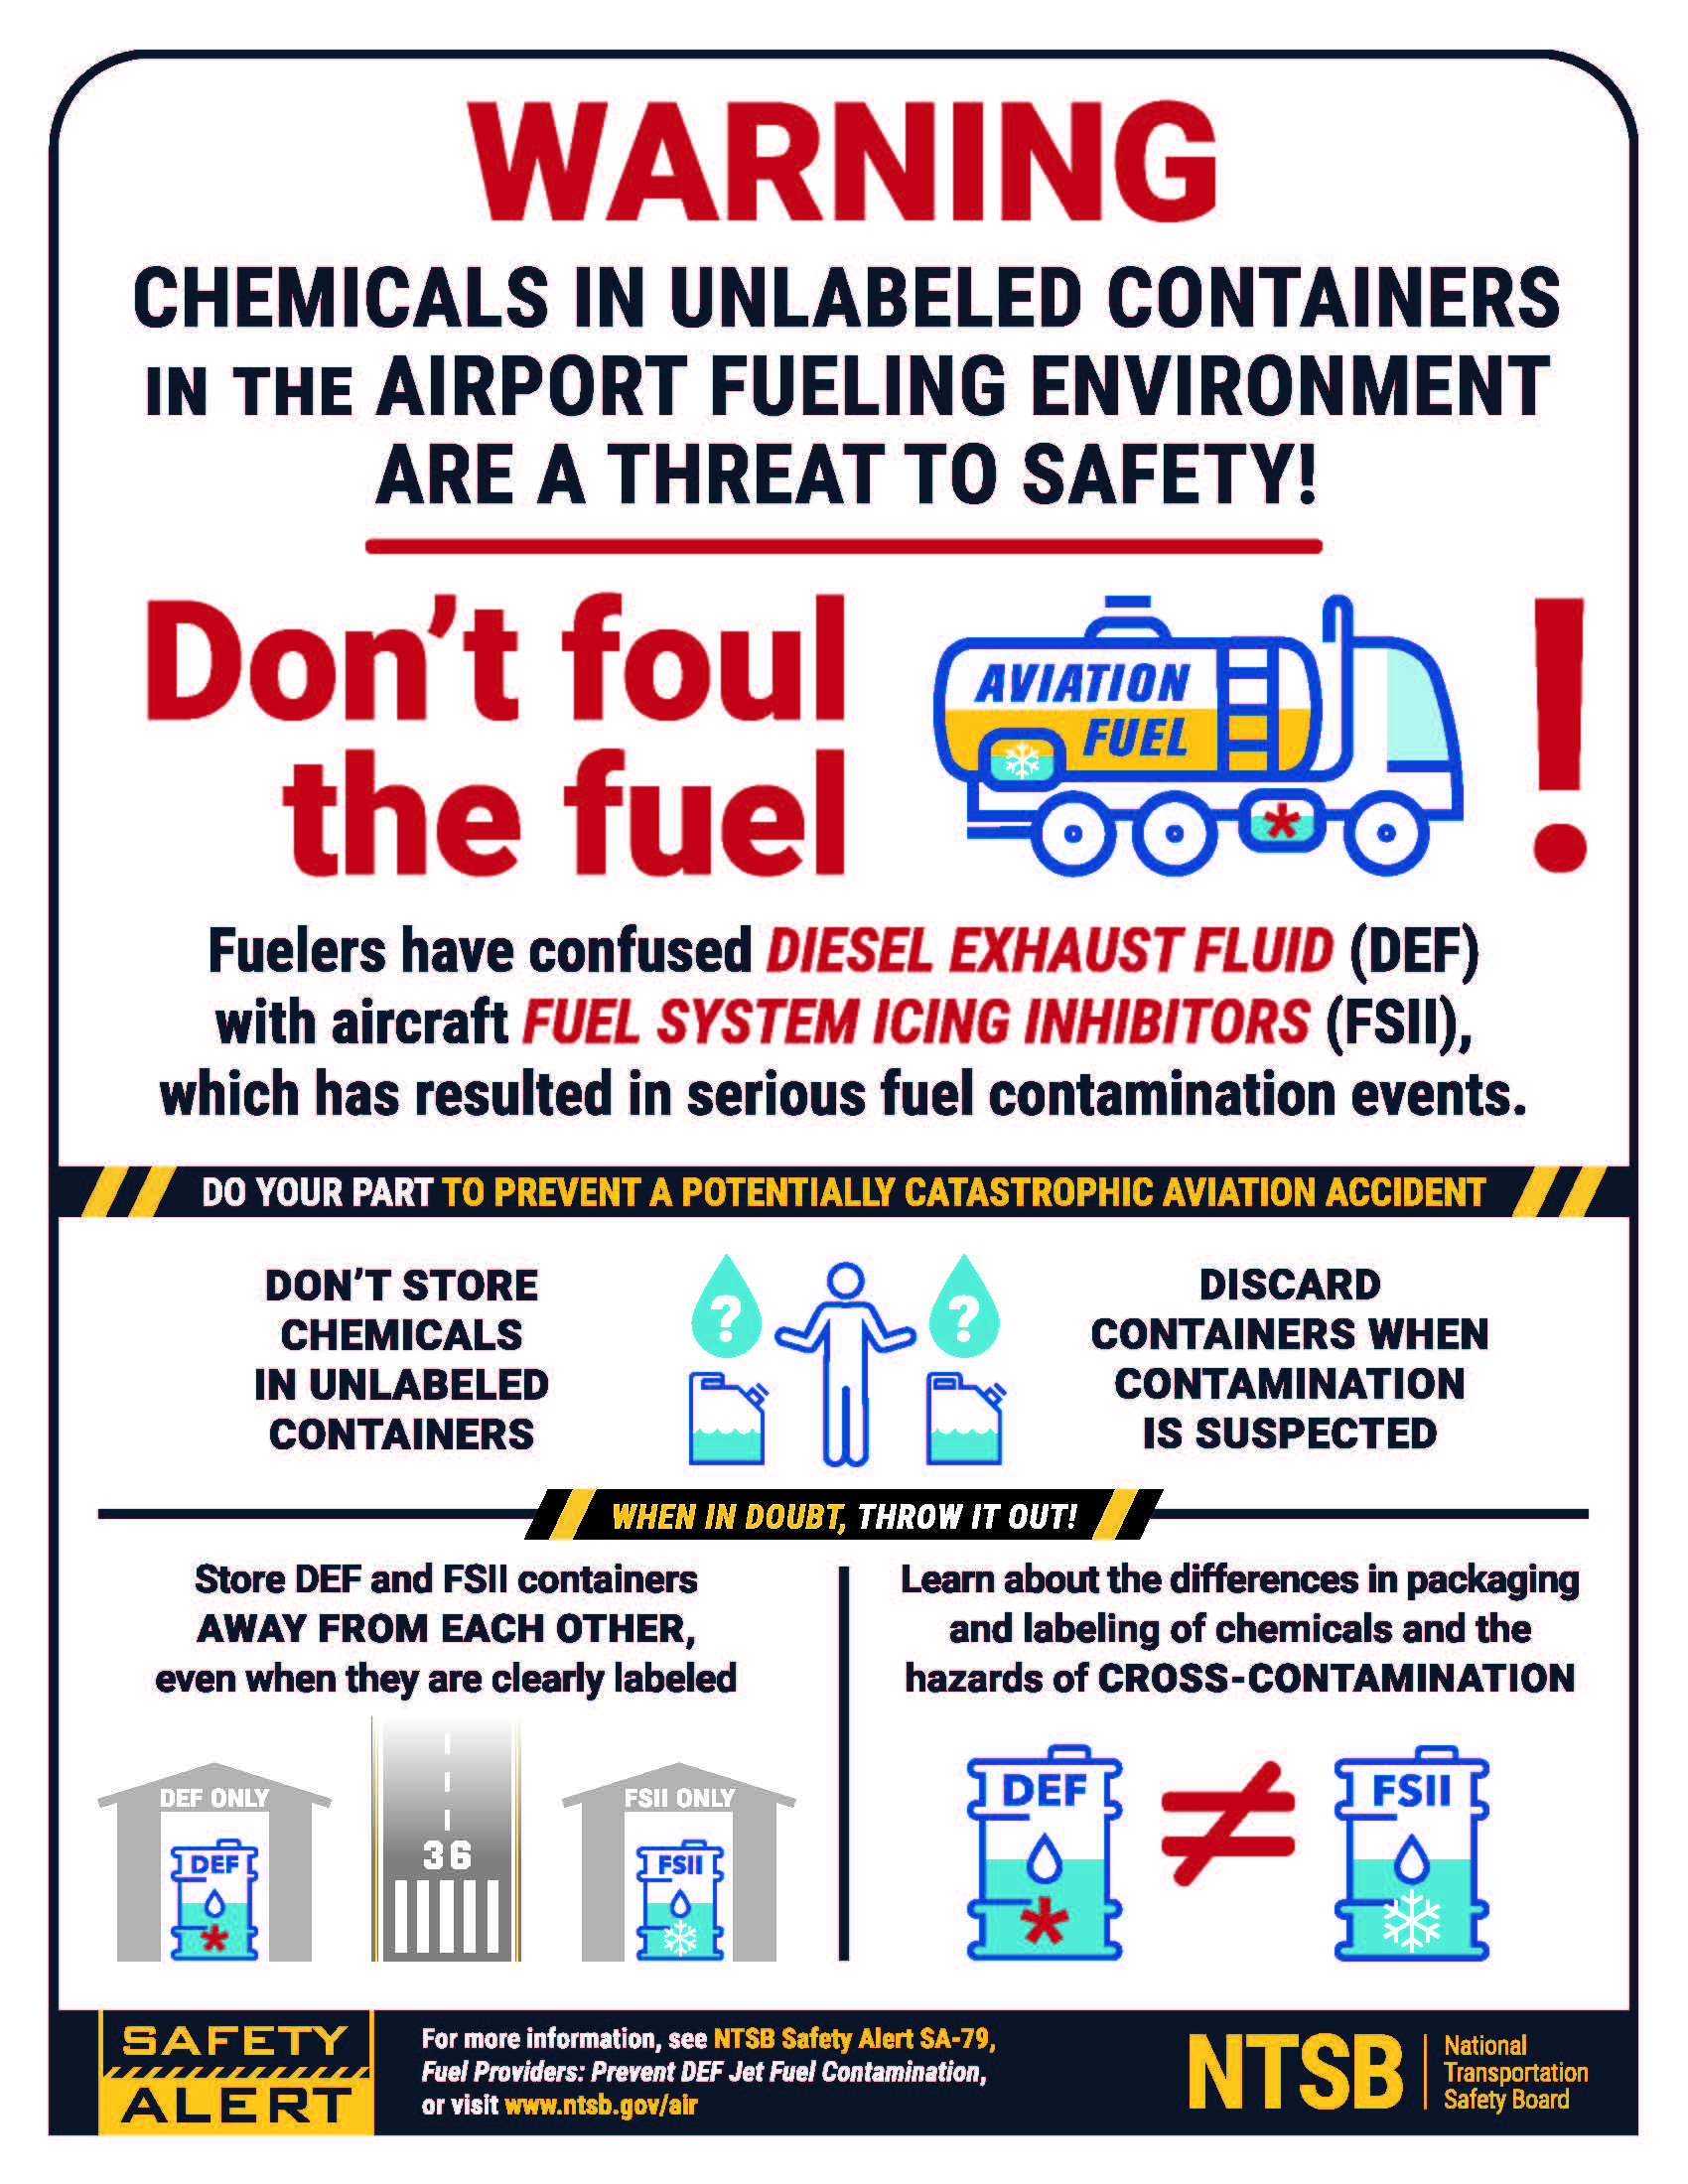 The NTSB created a safety poster to supplement the information contained in its Safety Alert 079.